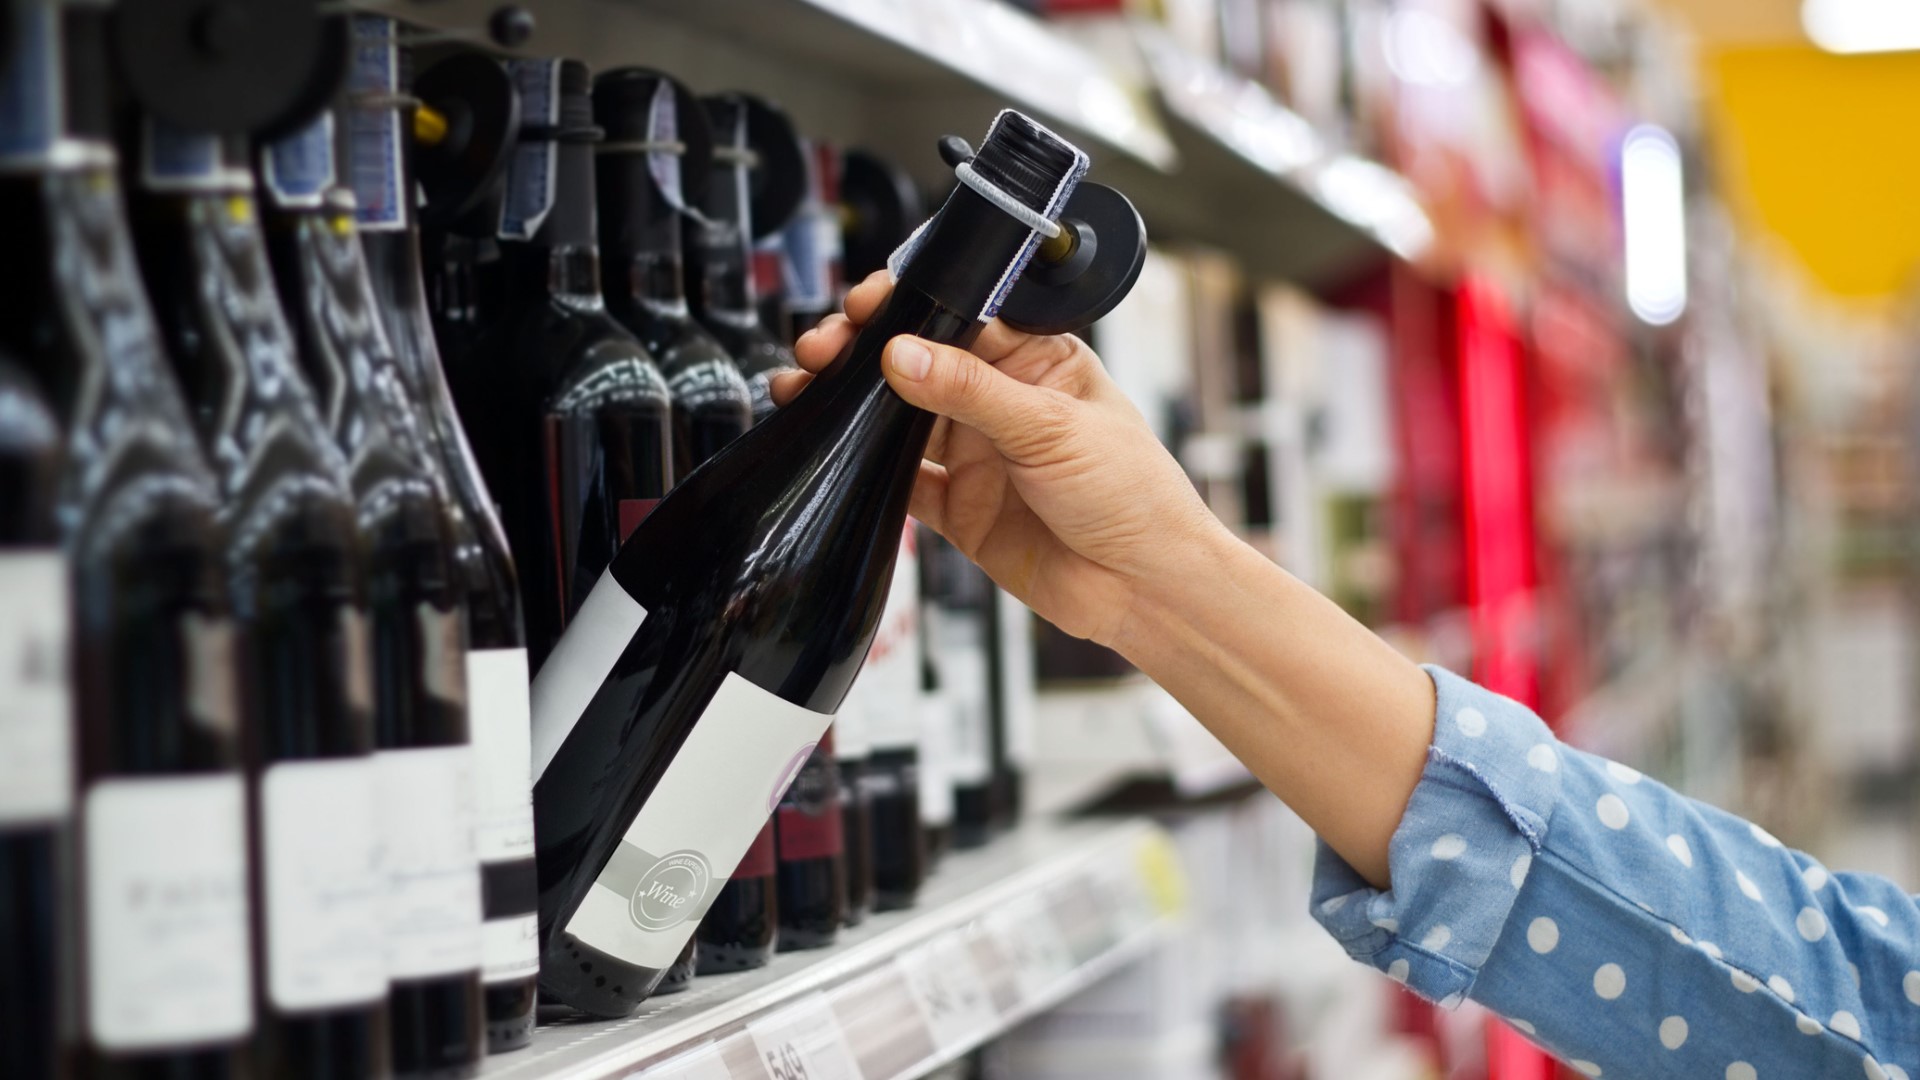 While retailers are getting a boost in alcohol sales during the COVID-19 pandemic, that’s not necessarily the case for manufacturers.